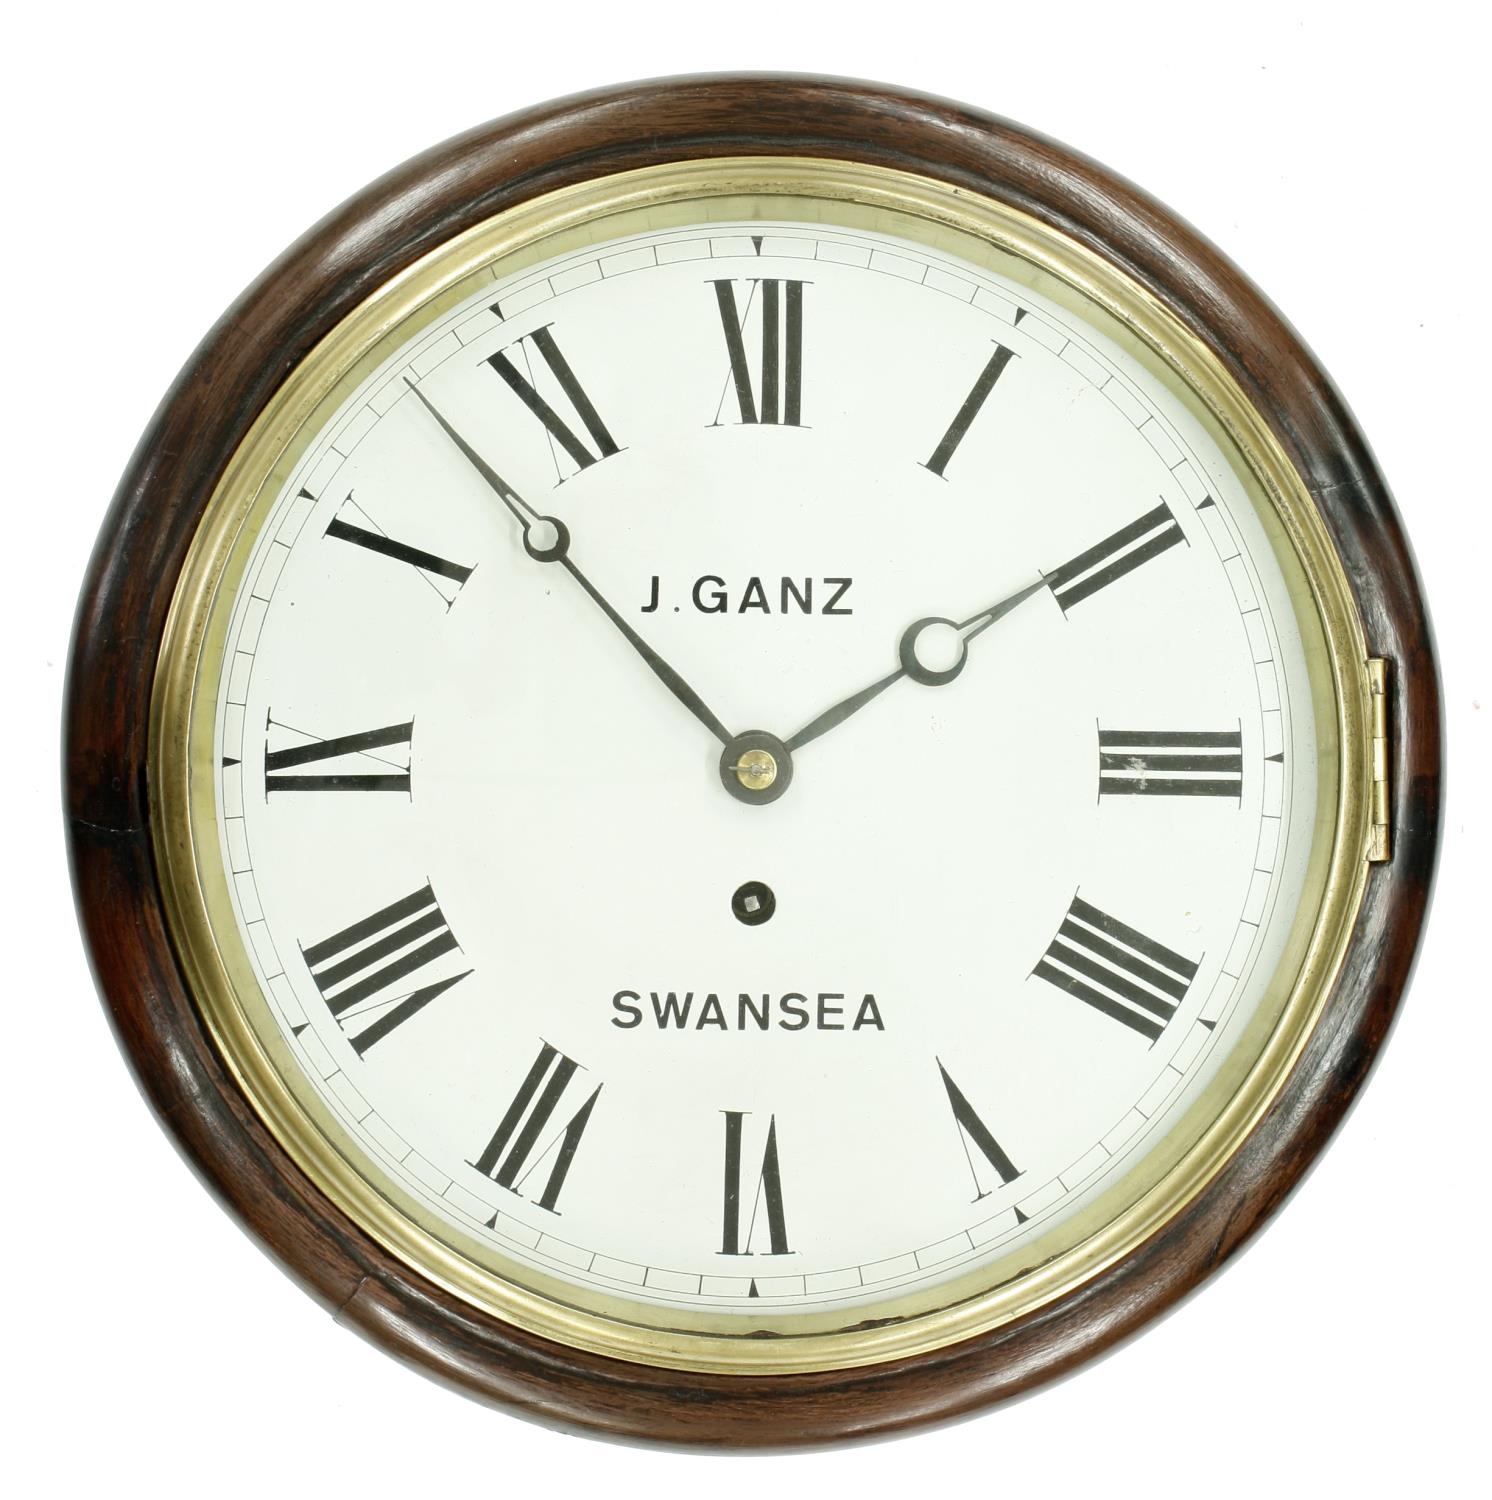 Mahogany silver fusee 10"wall dial clock signed J. Ganz, Swansea, within a cast bezel and turned